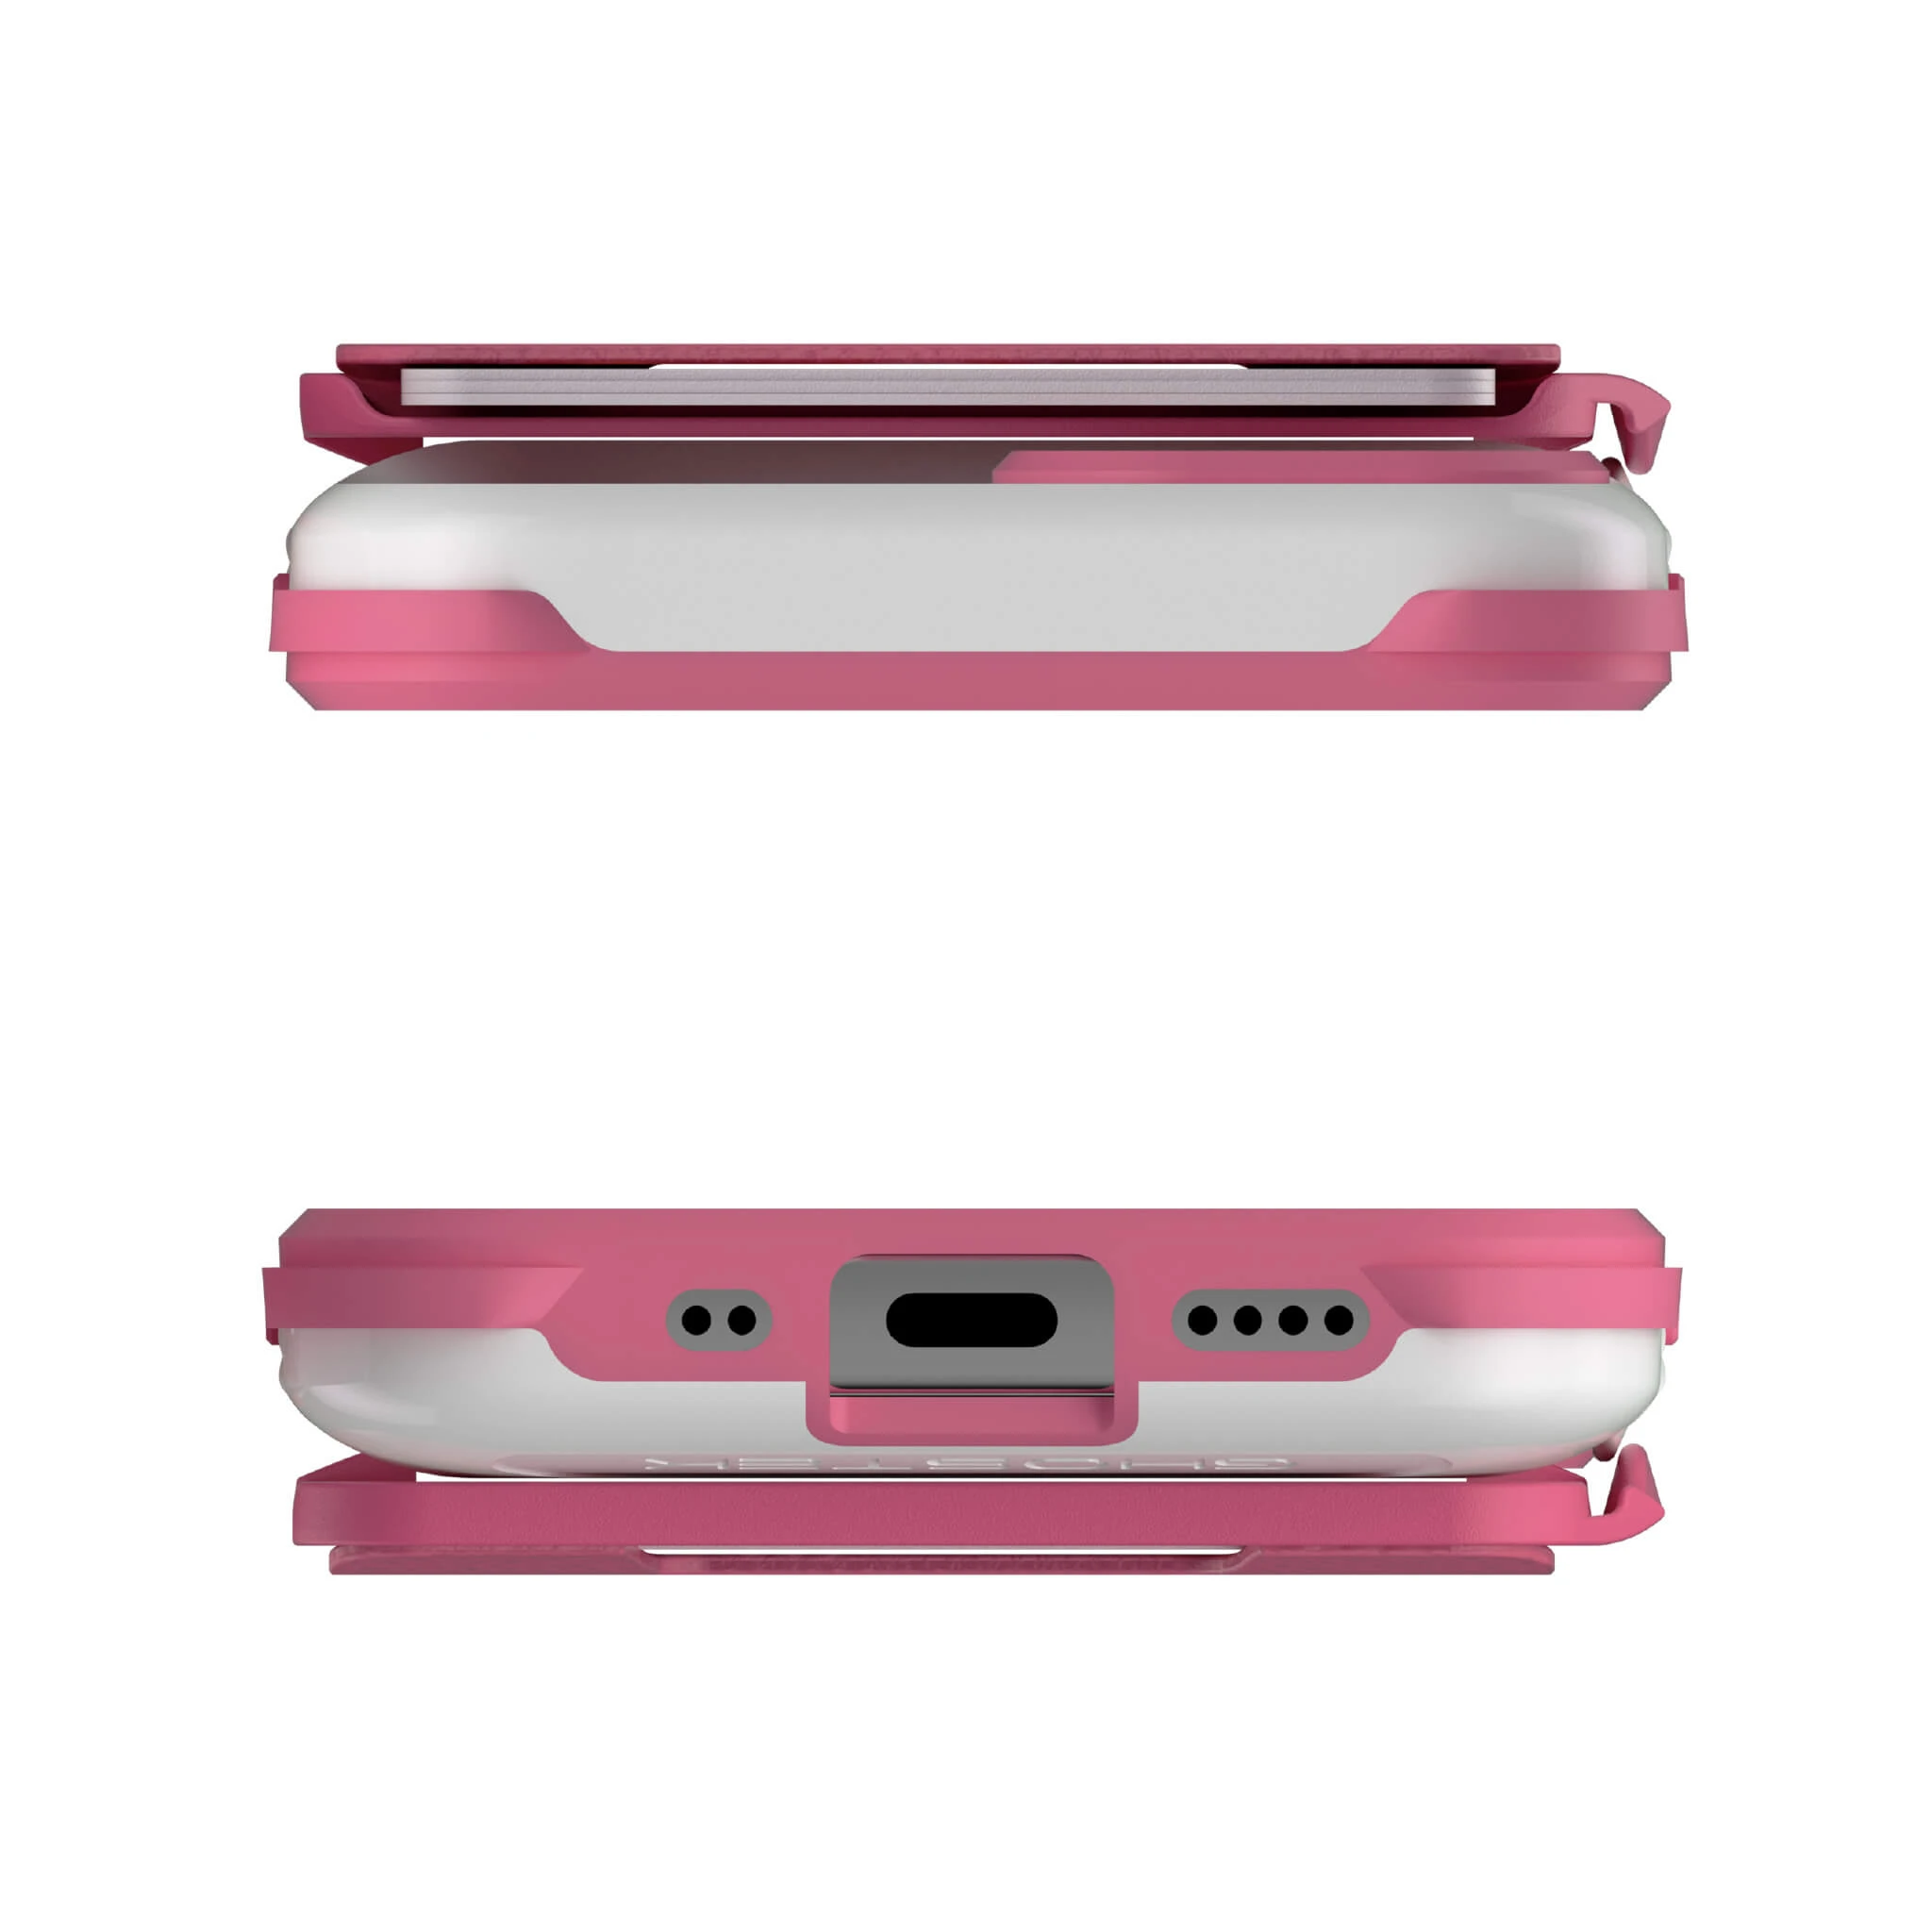 iPhone 12  - Magnetic Wallet Case with Card Holder [Pink]